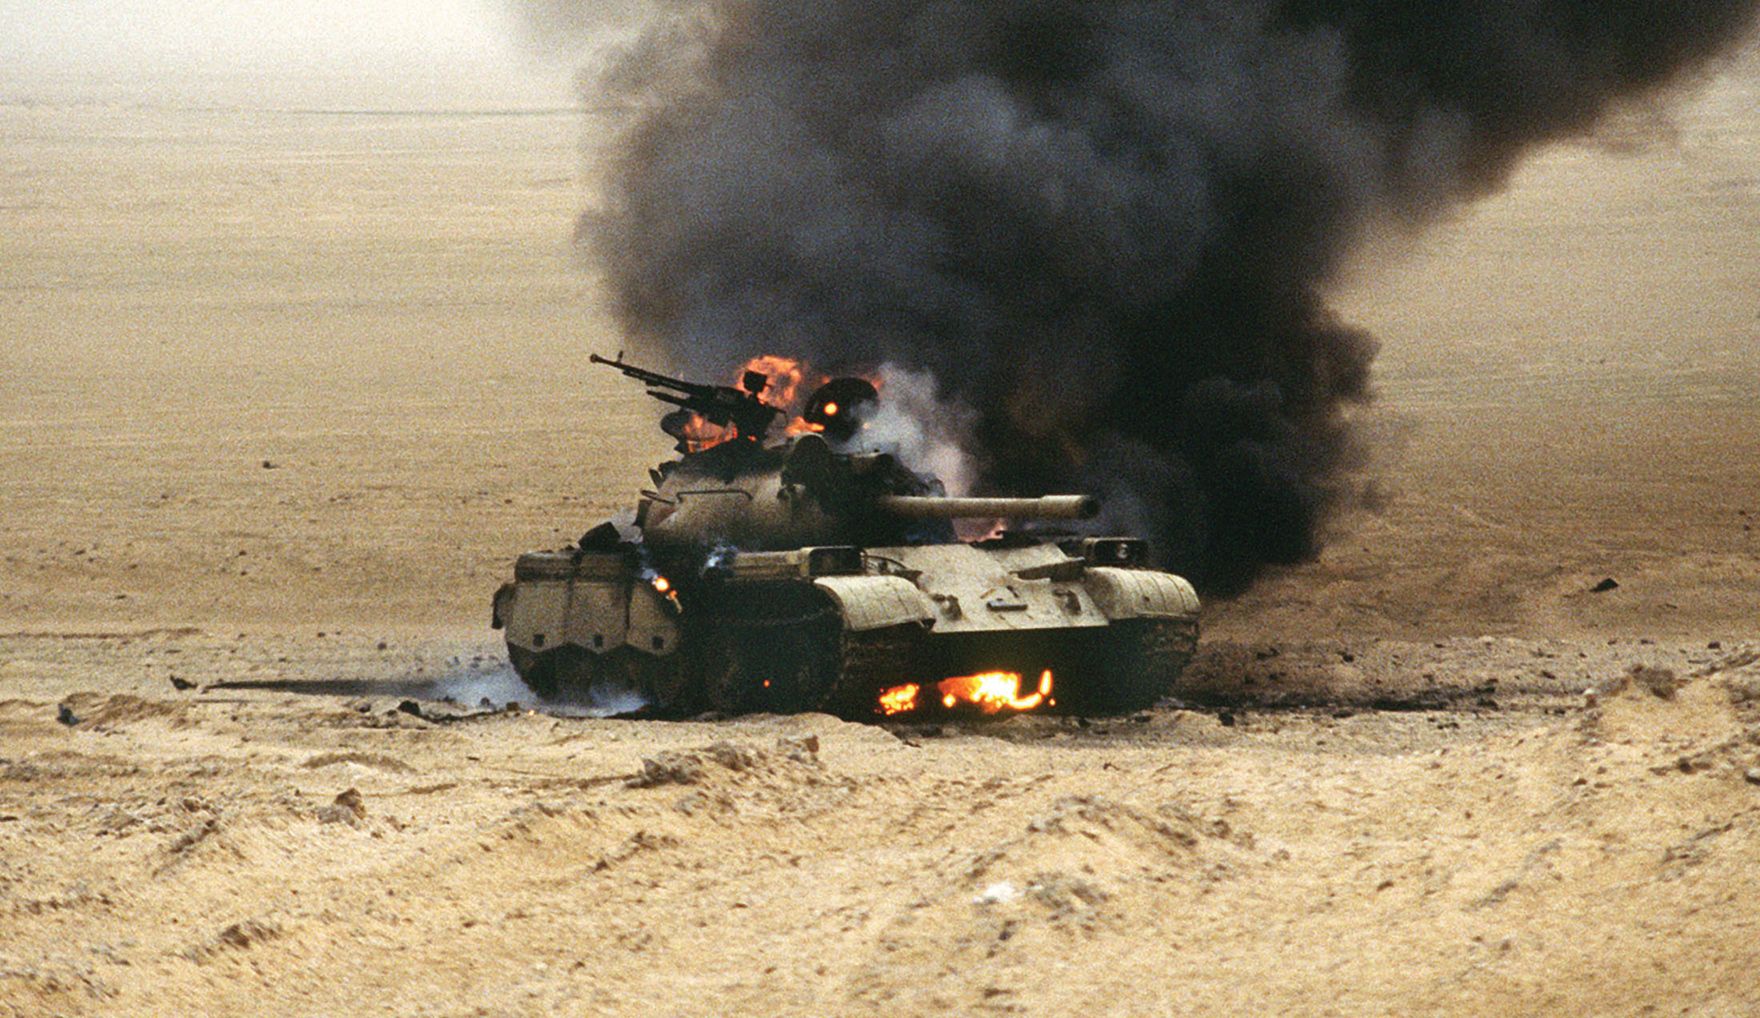 Elements of the British 1st Armored division destroyed this Iraqi Type 69 Chinese tank.